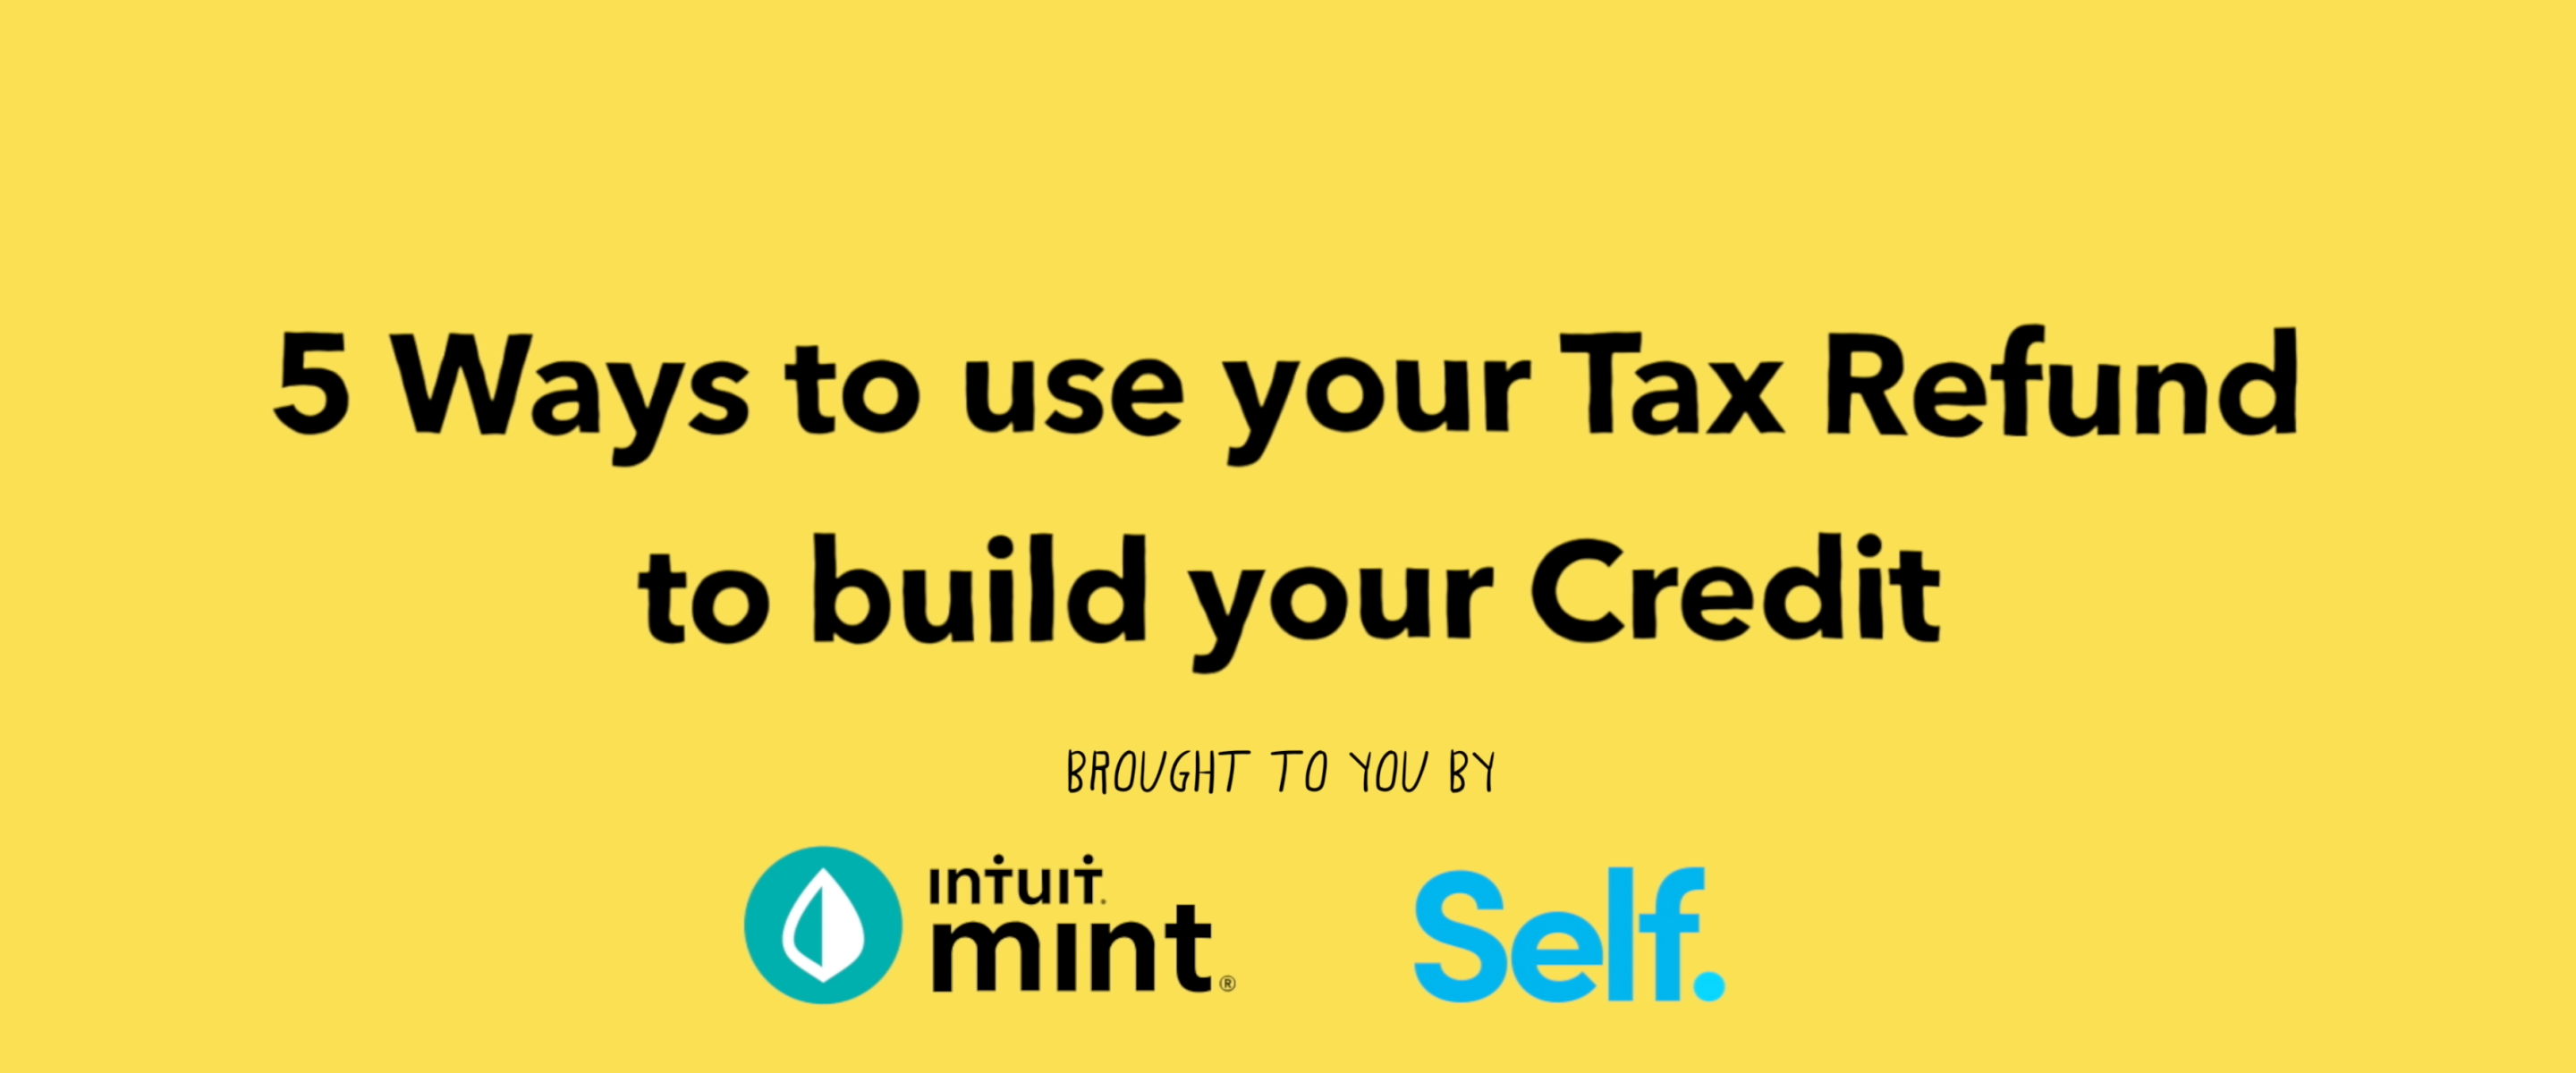 Title: 5 Ways to use your tax refund to build your credit